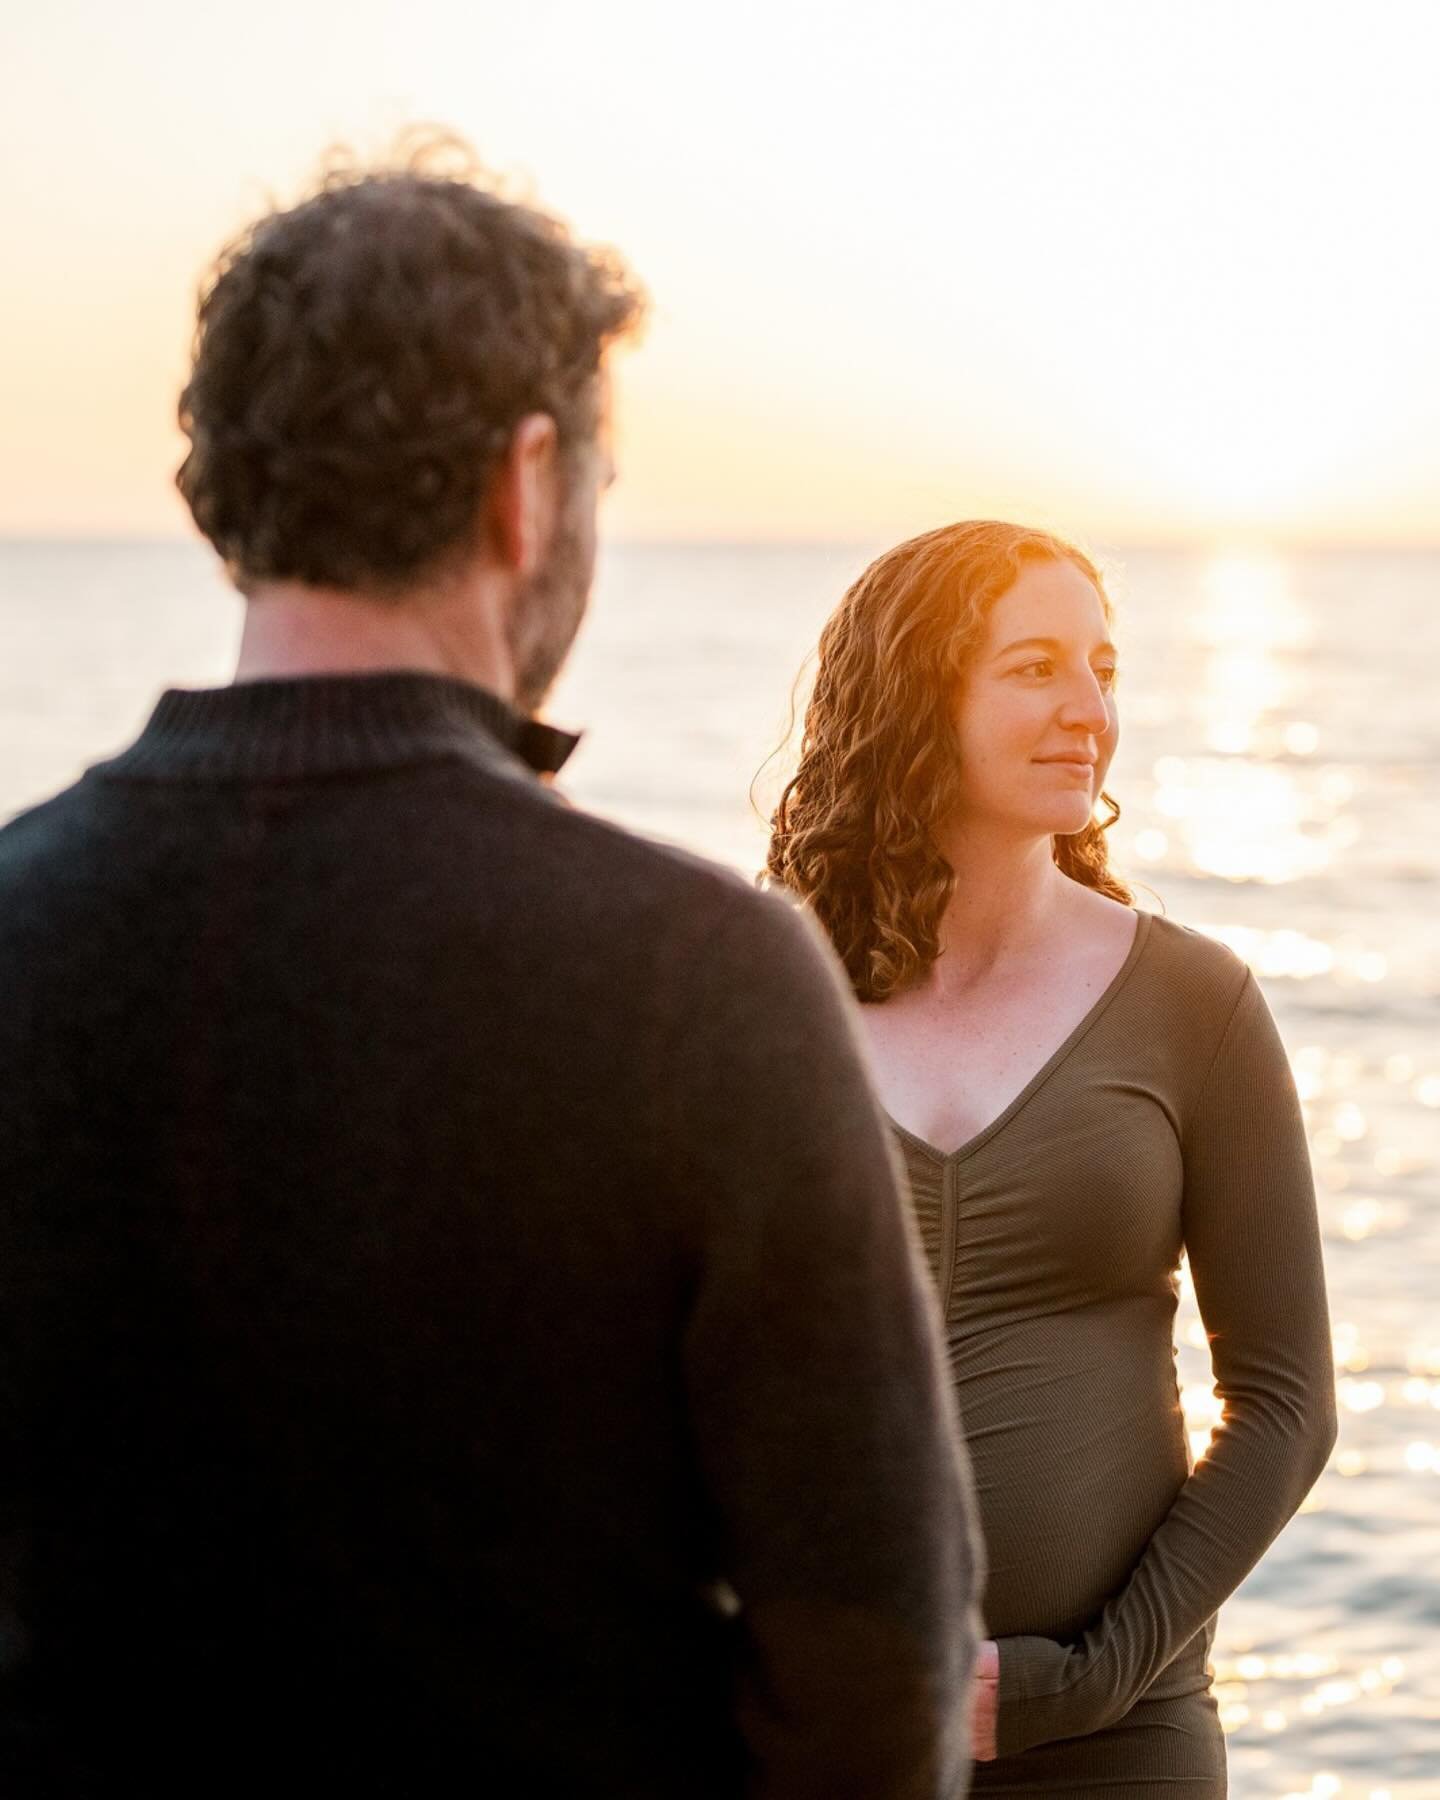 Sunsets at the beach hold a special place in Jenny and Mike&rsquo;s hearts, and I was lucky enough to capture the perfect sunset during their maternity session. 🌅 

We rolled up beachside in style on their side by side - not a single cloud in the sk